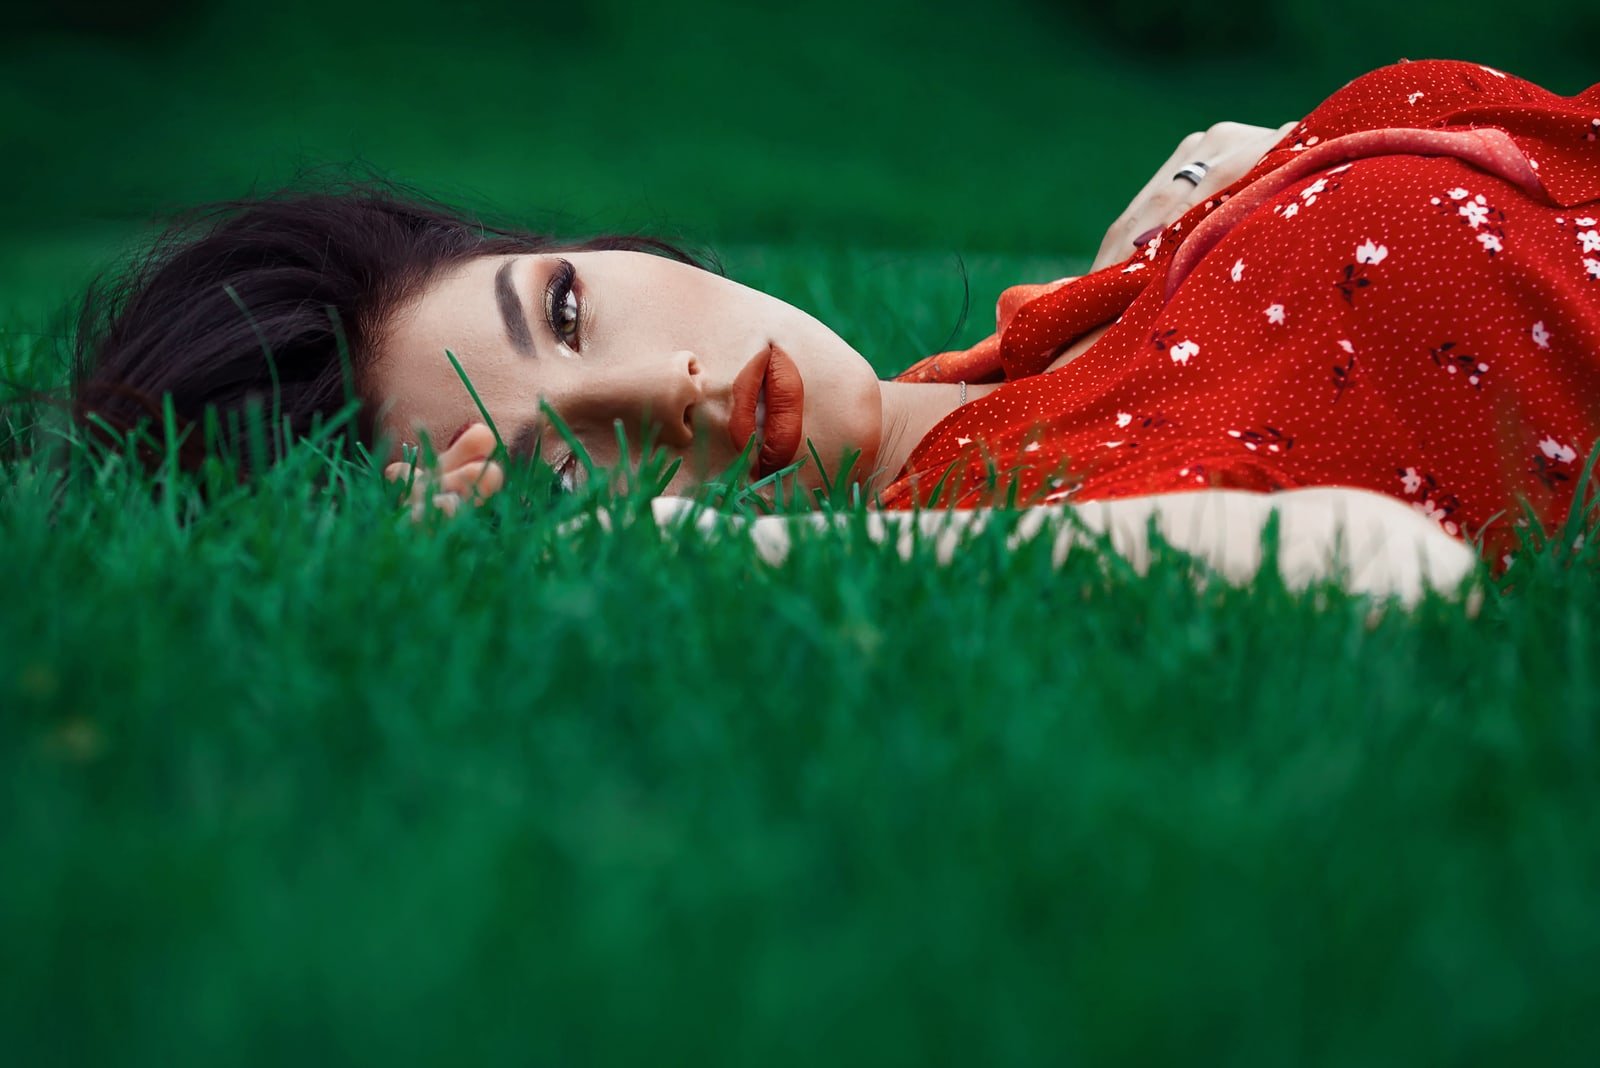 the woman lies on the grass